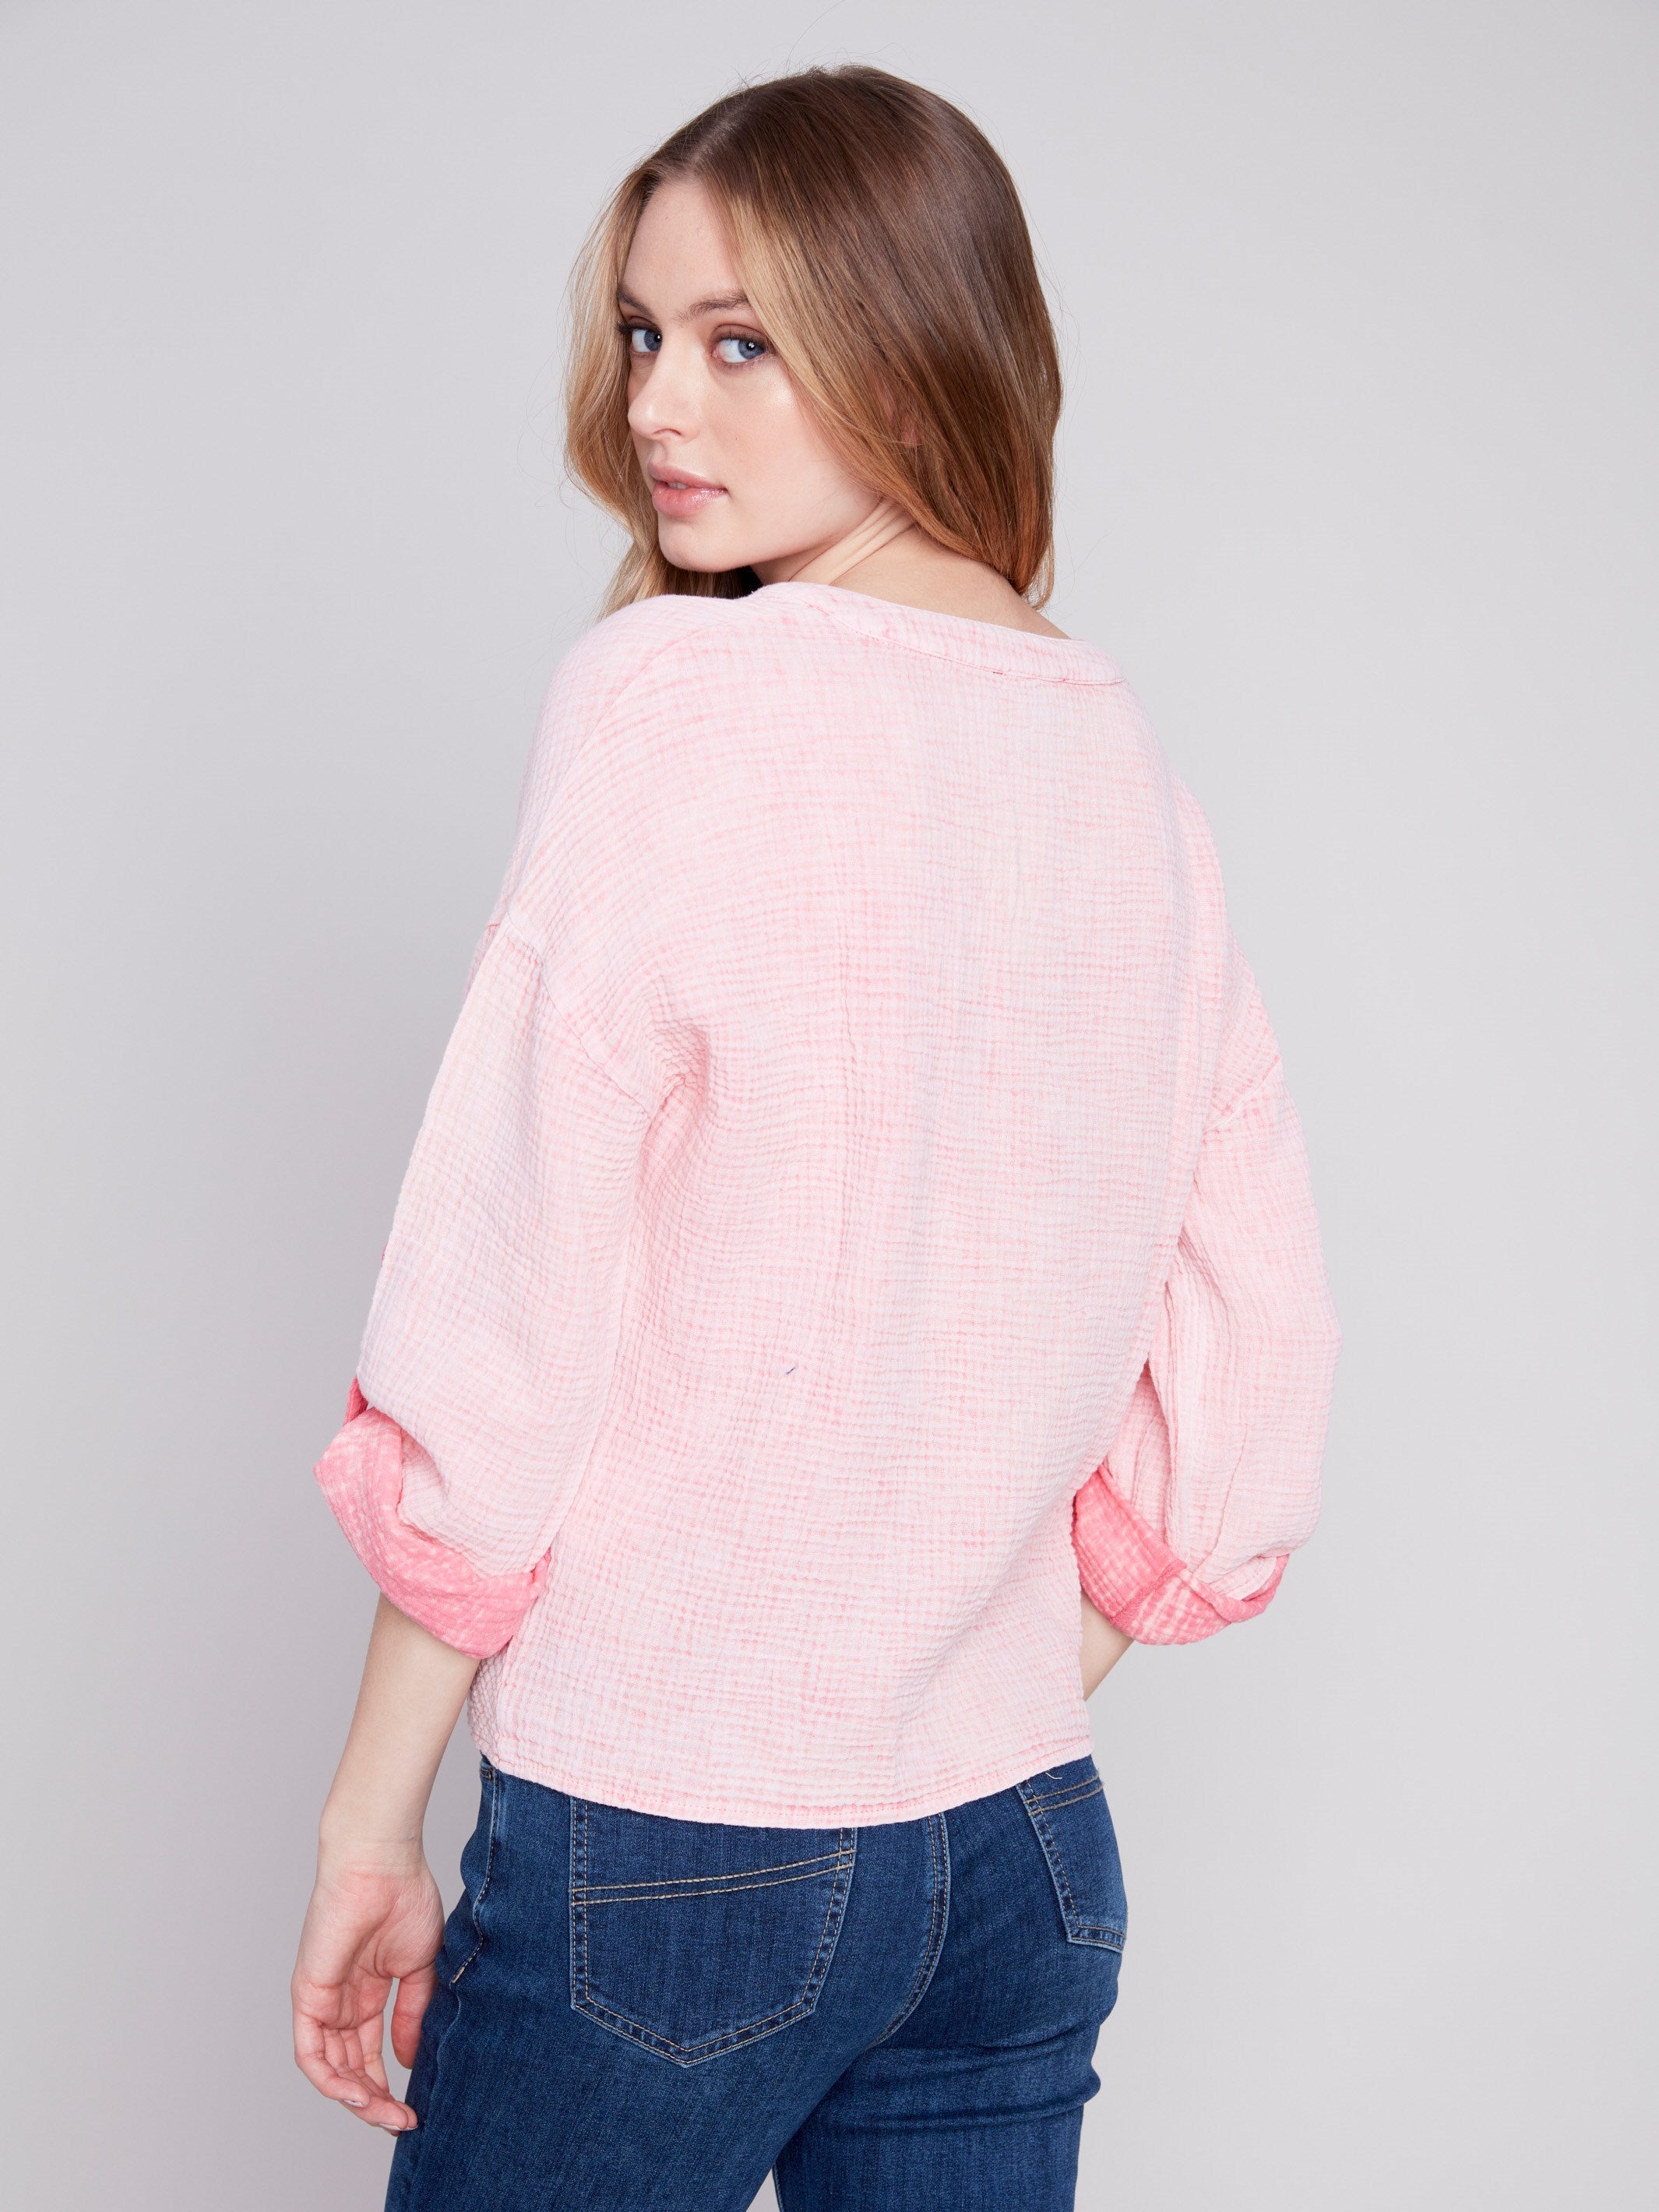 Bubble Cotton Blouse with Front Twist - Flamingo - Charlie B Collection Canada - Image 2